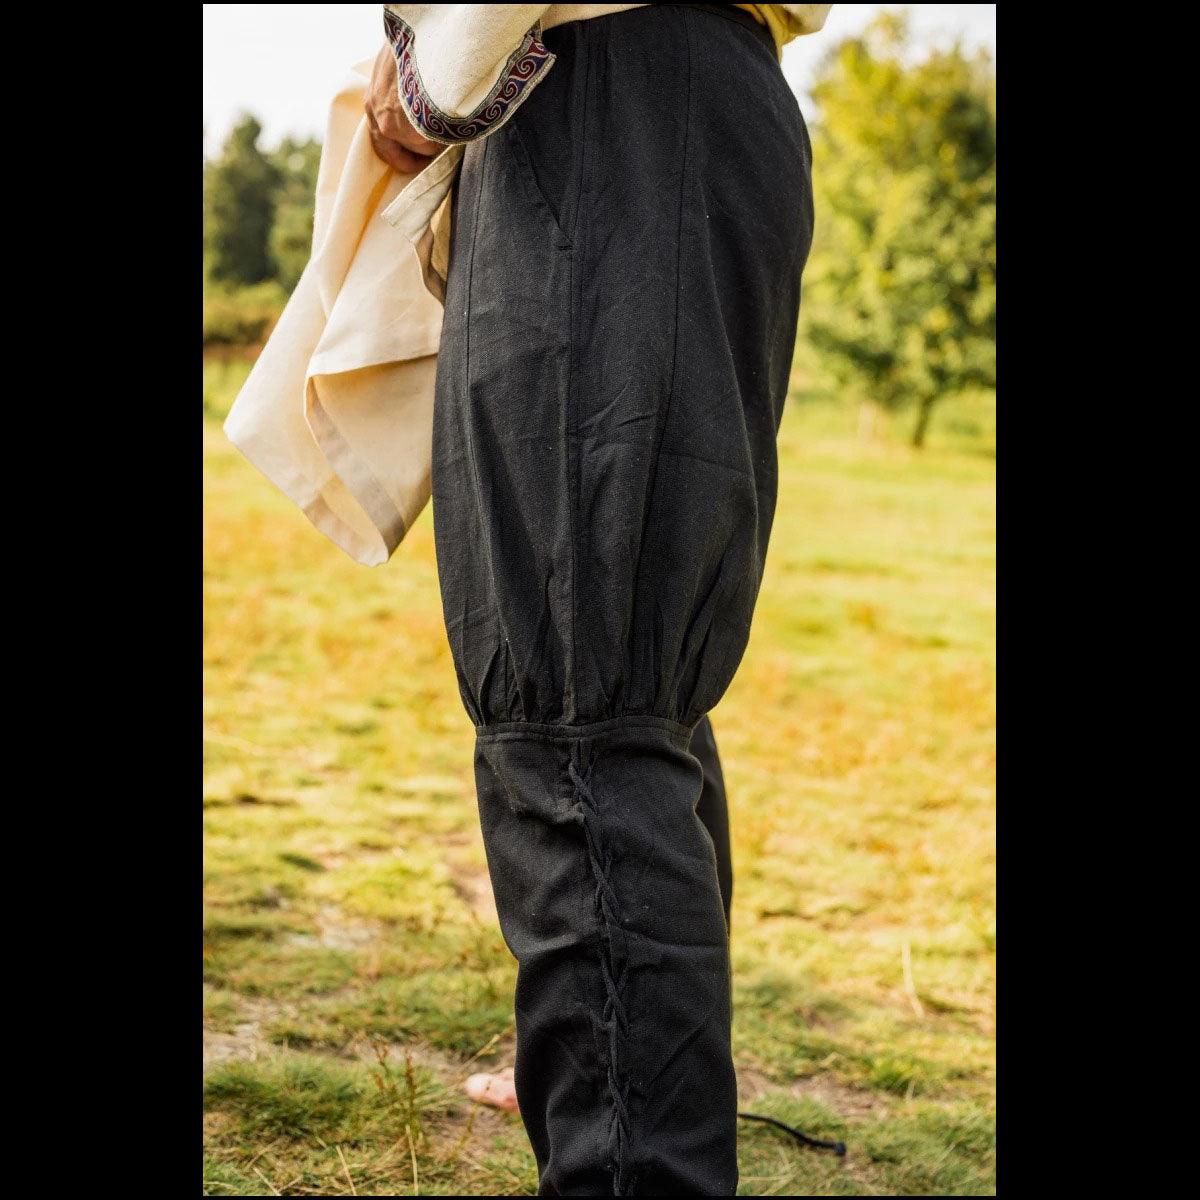 Premium Pirate Pants - Authentic Cut in Cotton with Leg Lacing (Black) side view